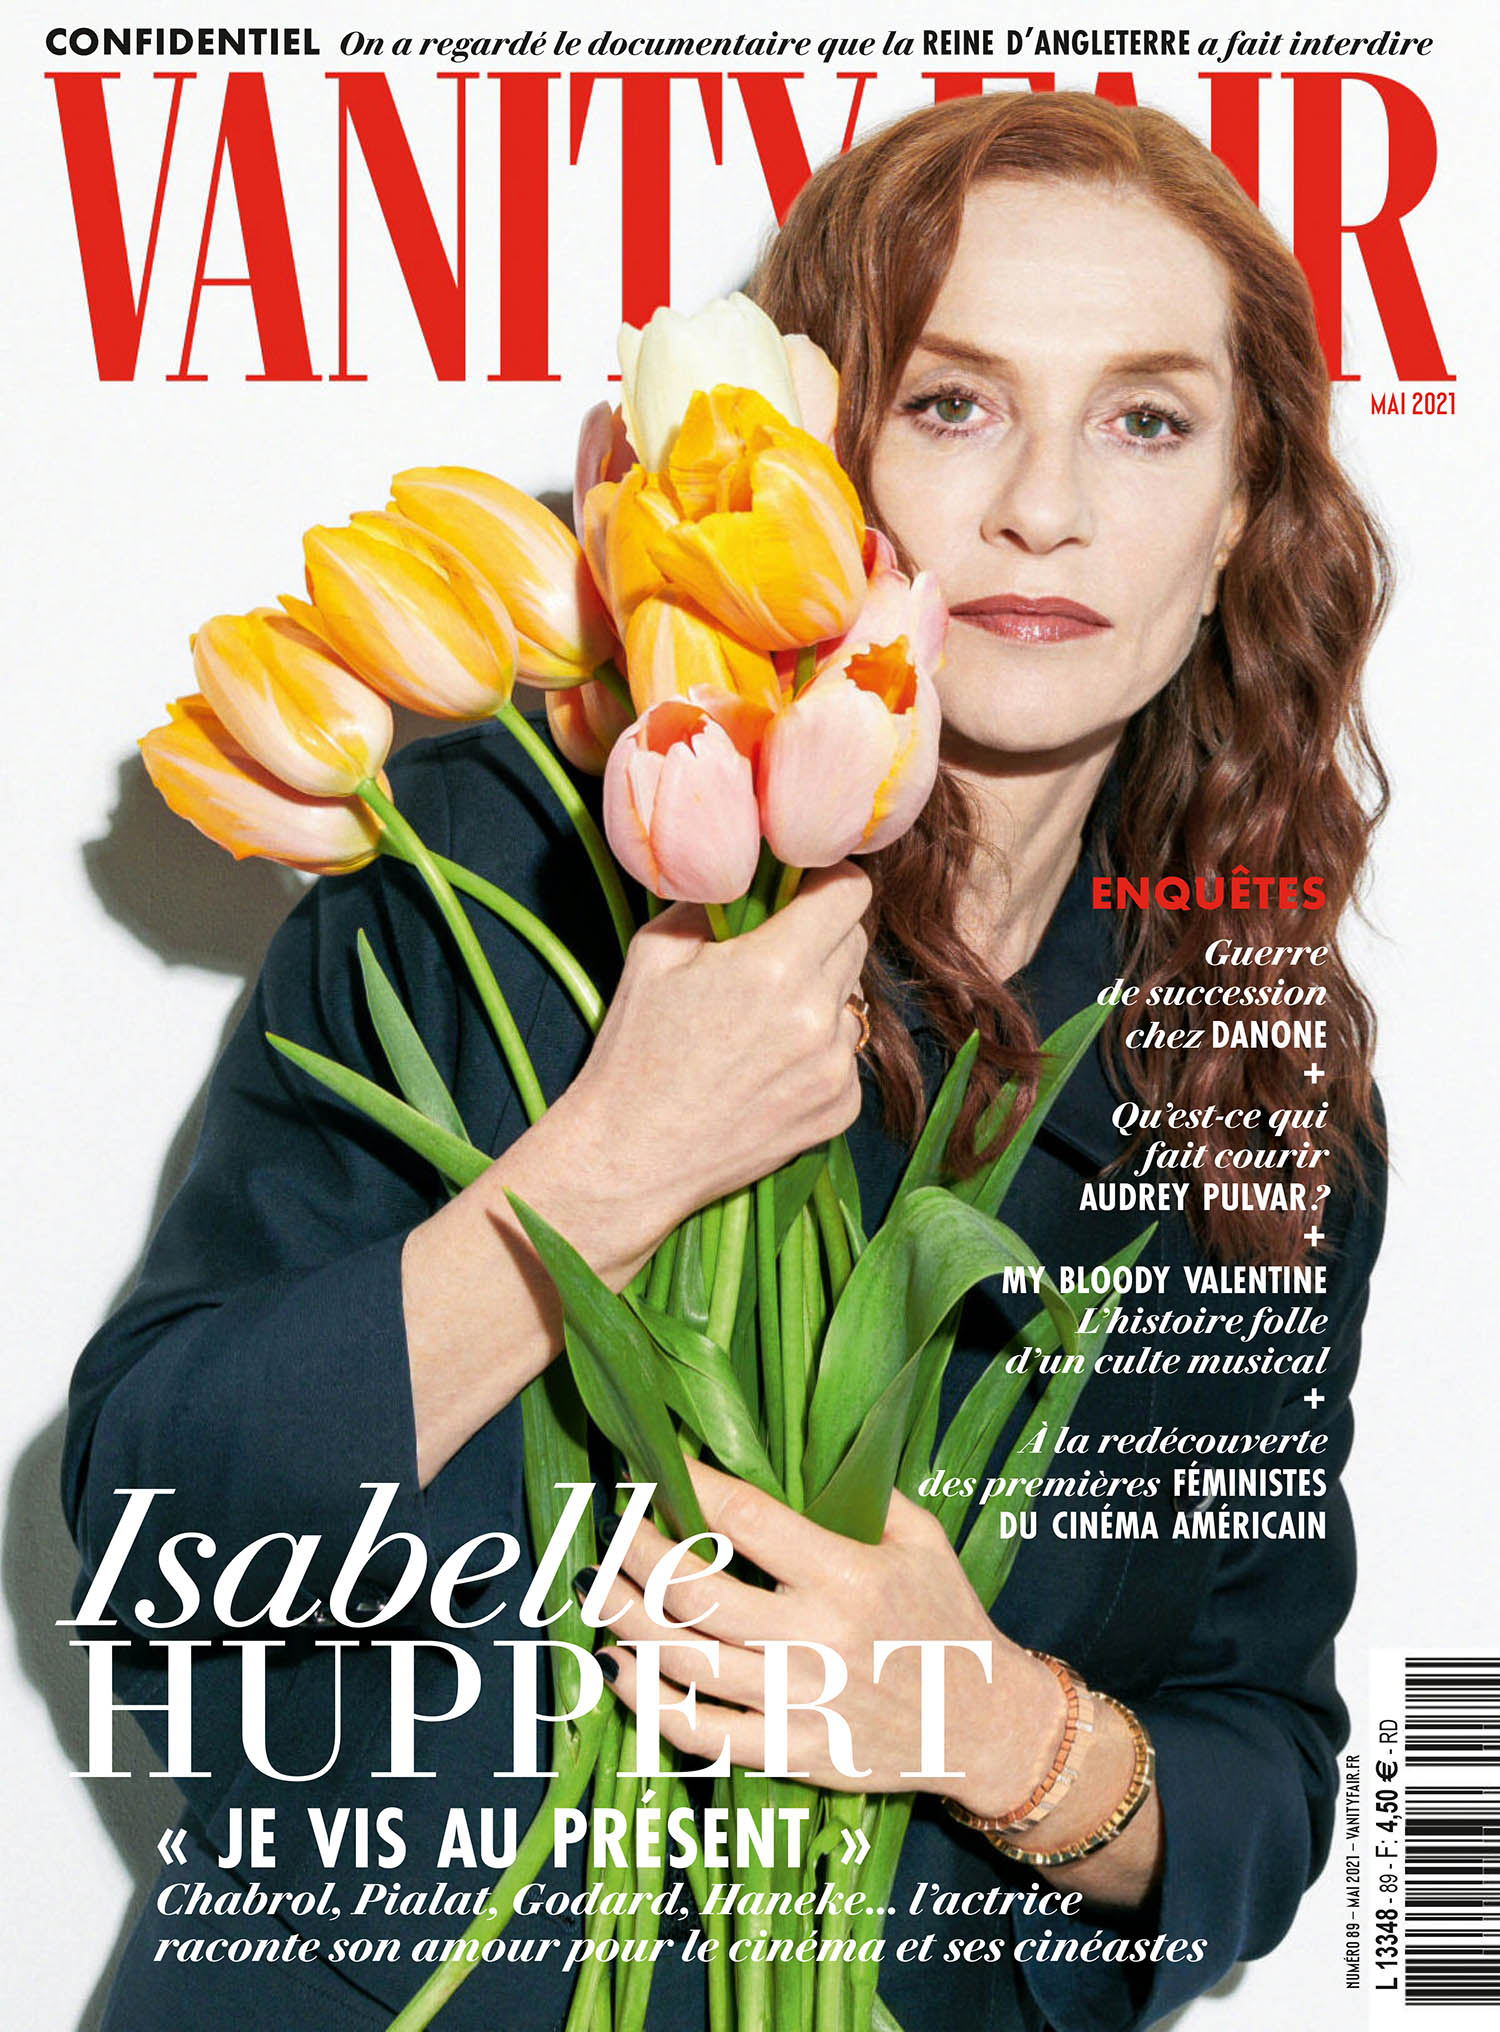 Isabelle Huppert covers Vanity Fair France May 2021 by Katja Rahlwes